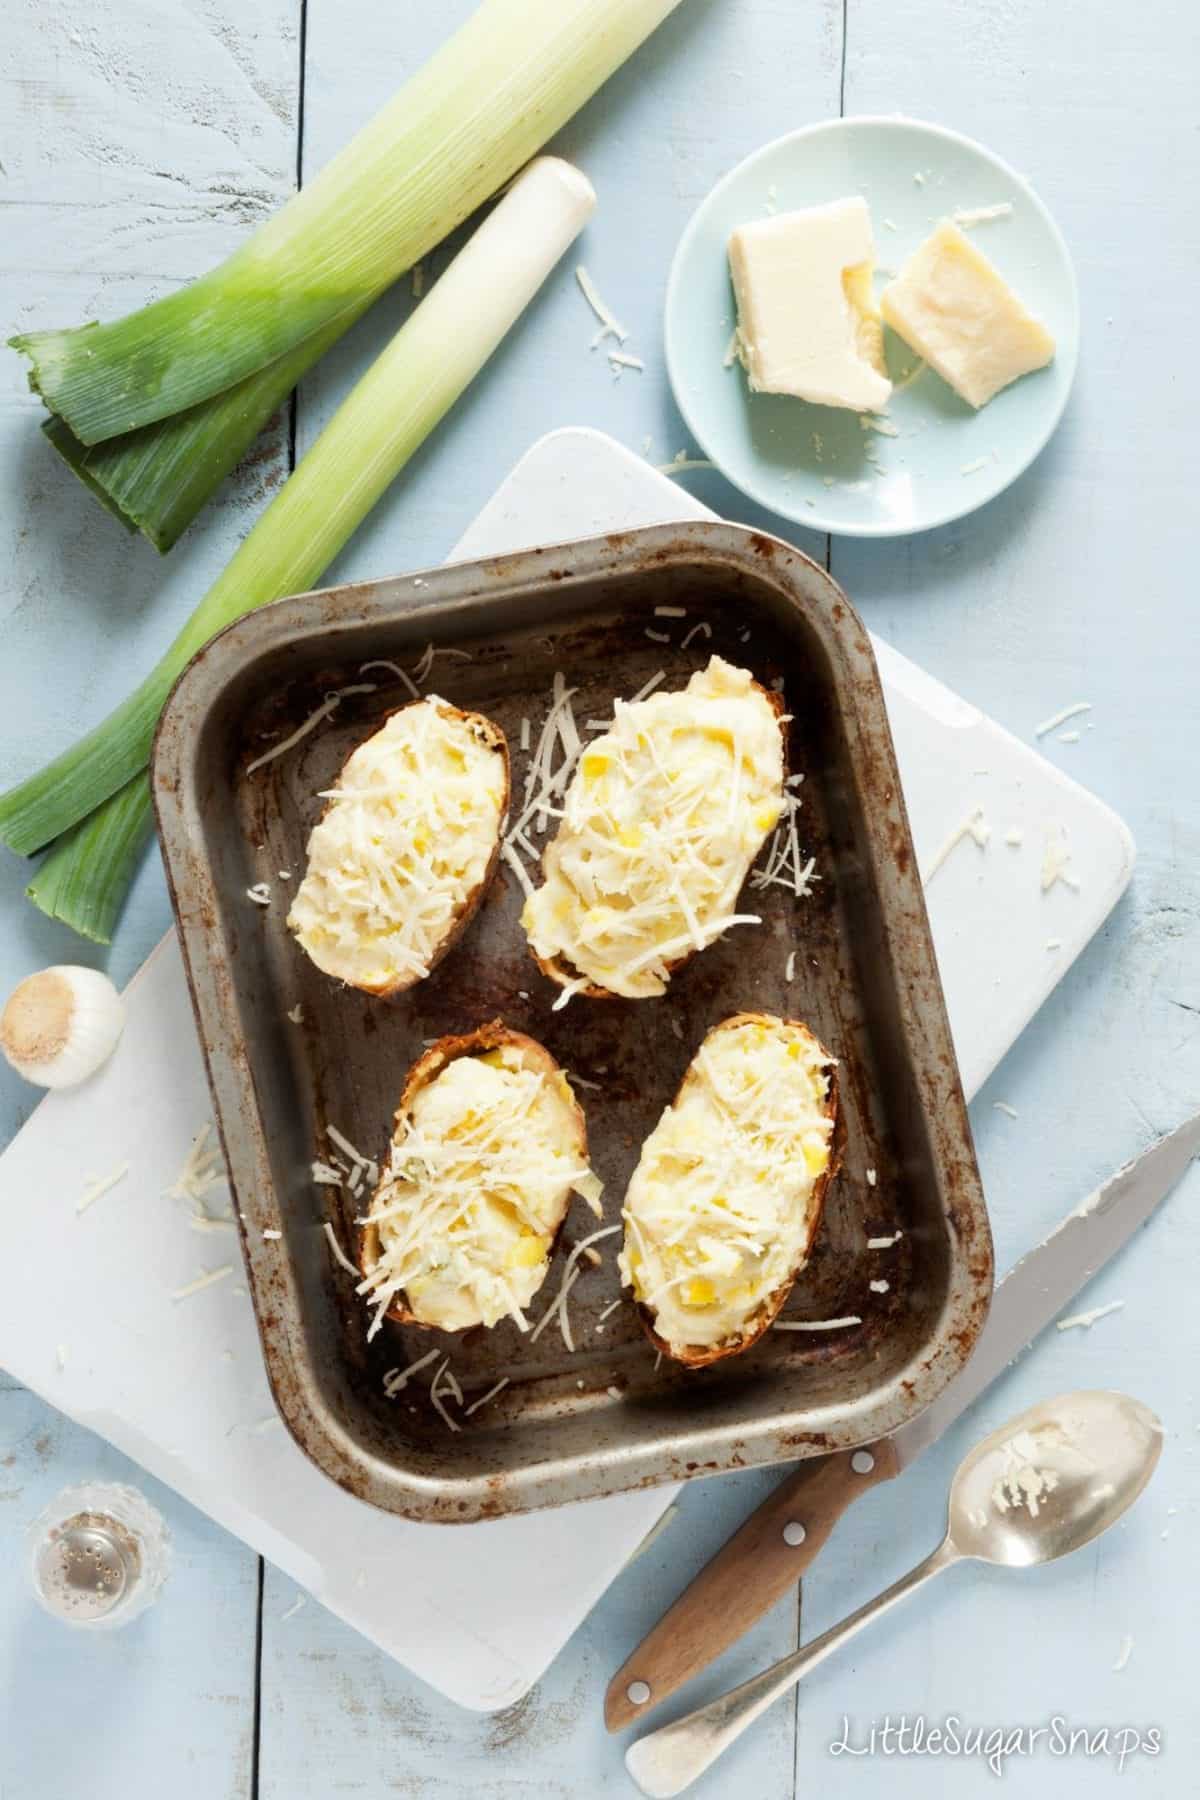 Four halves of stuffed potatoes in a baking tin ready to cook.